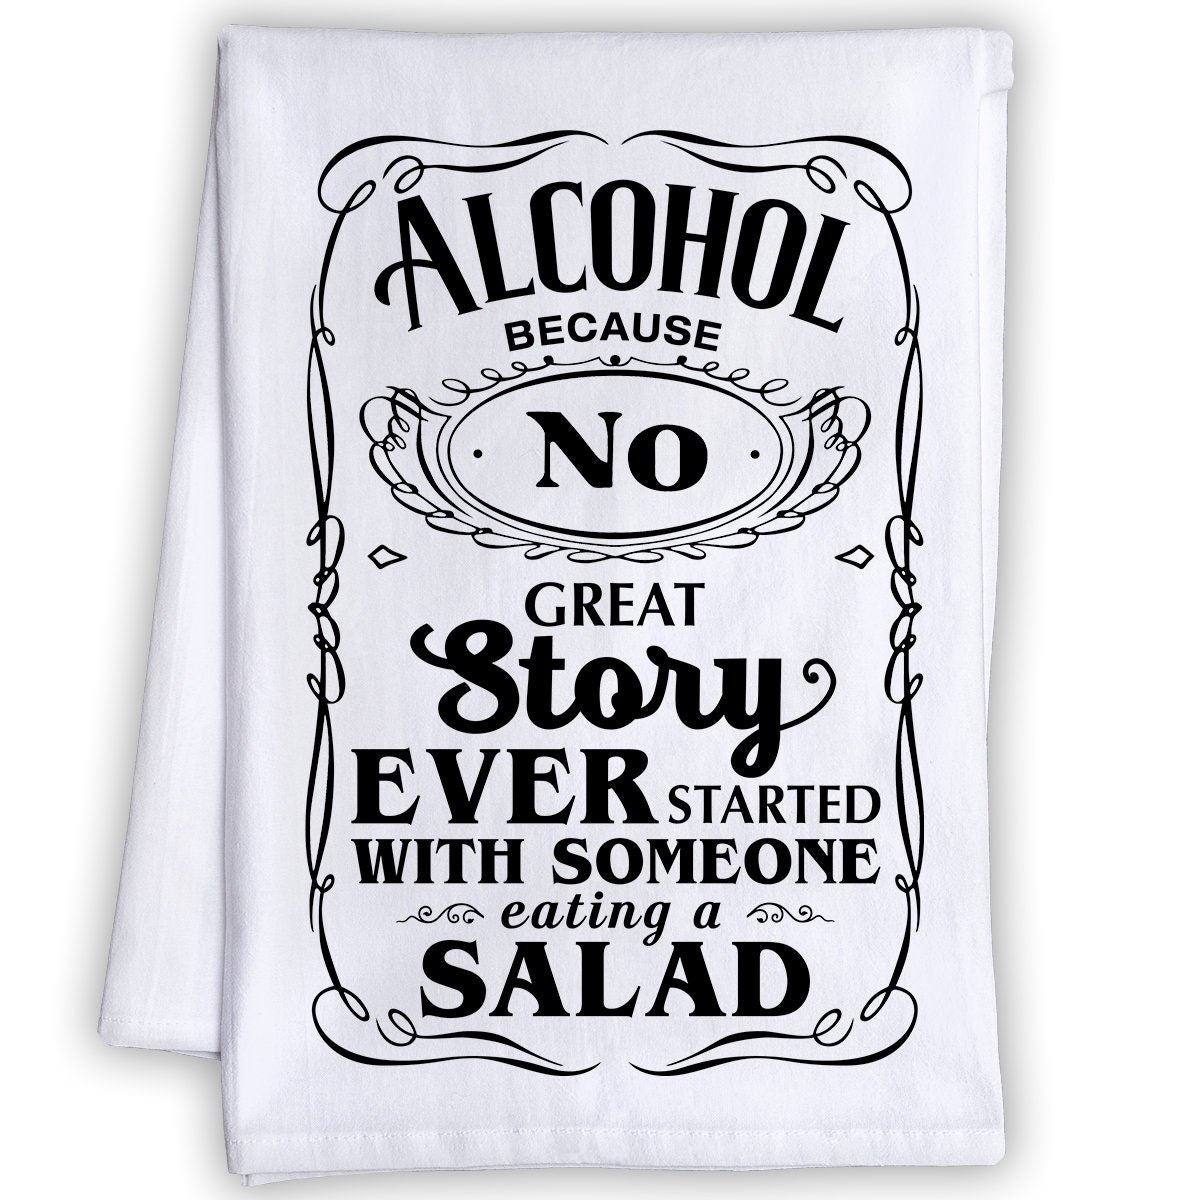 Funny Kitchen Tea Towels - Alcohol Because No Great Story Ever Started With - Humorous Fun Sayings - Cute Housewarming Gift/Fun Home Decor Lone Star Art 